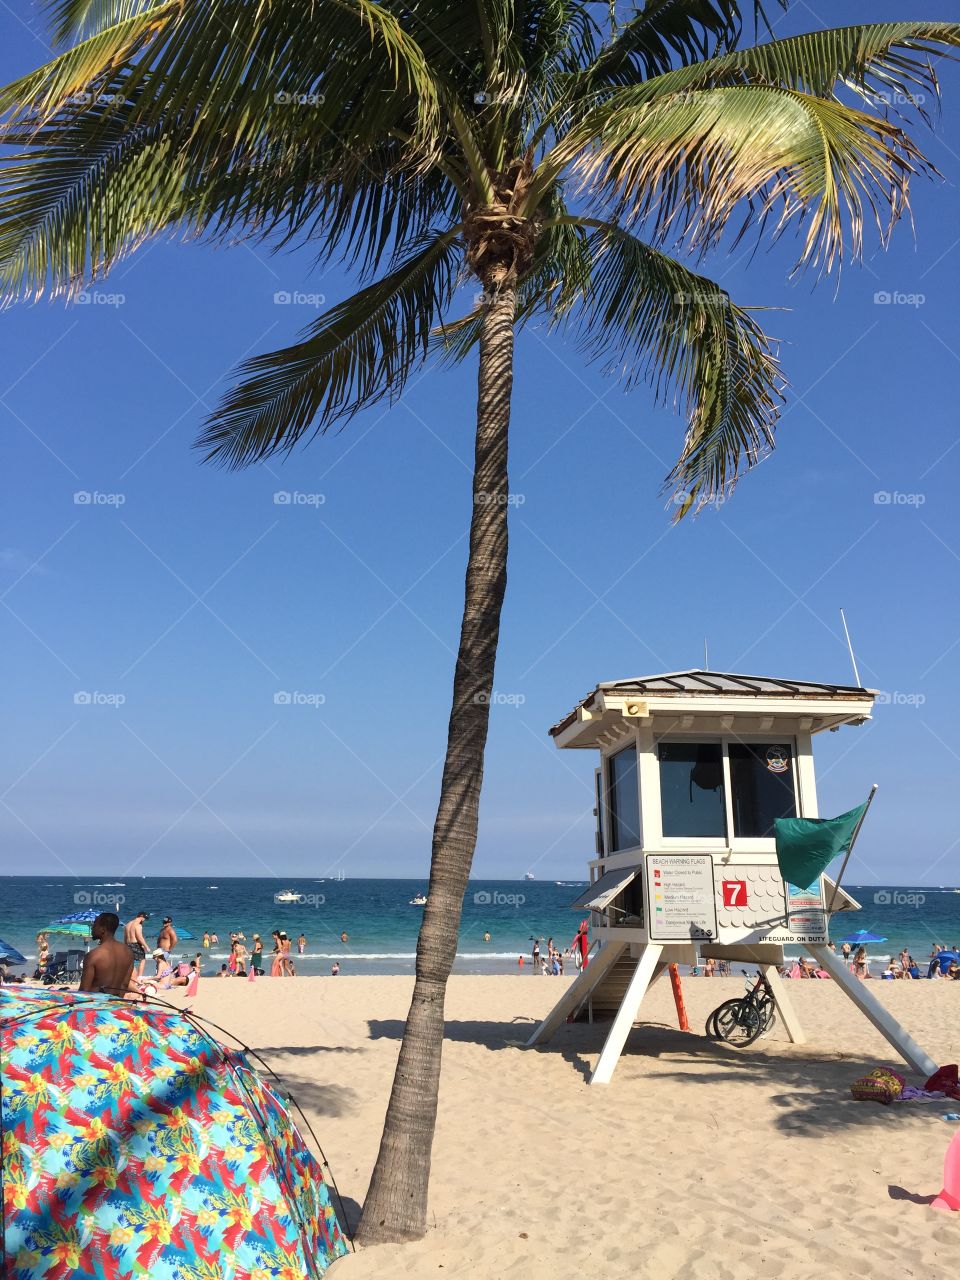 Lifeguard station at Fort Lauderdale Beach